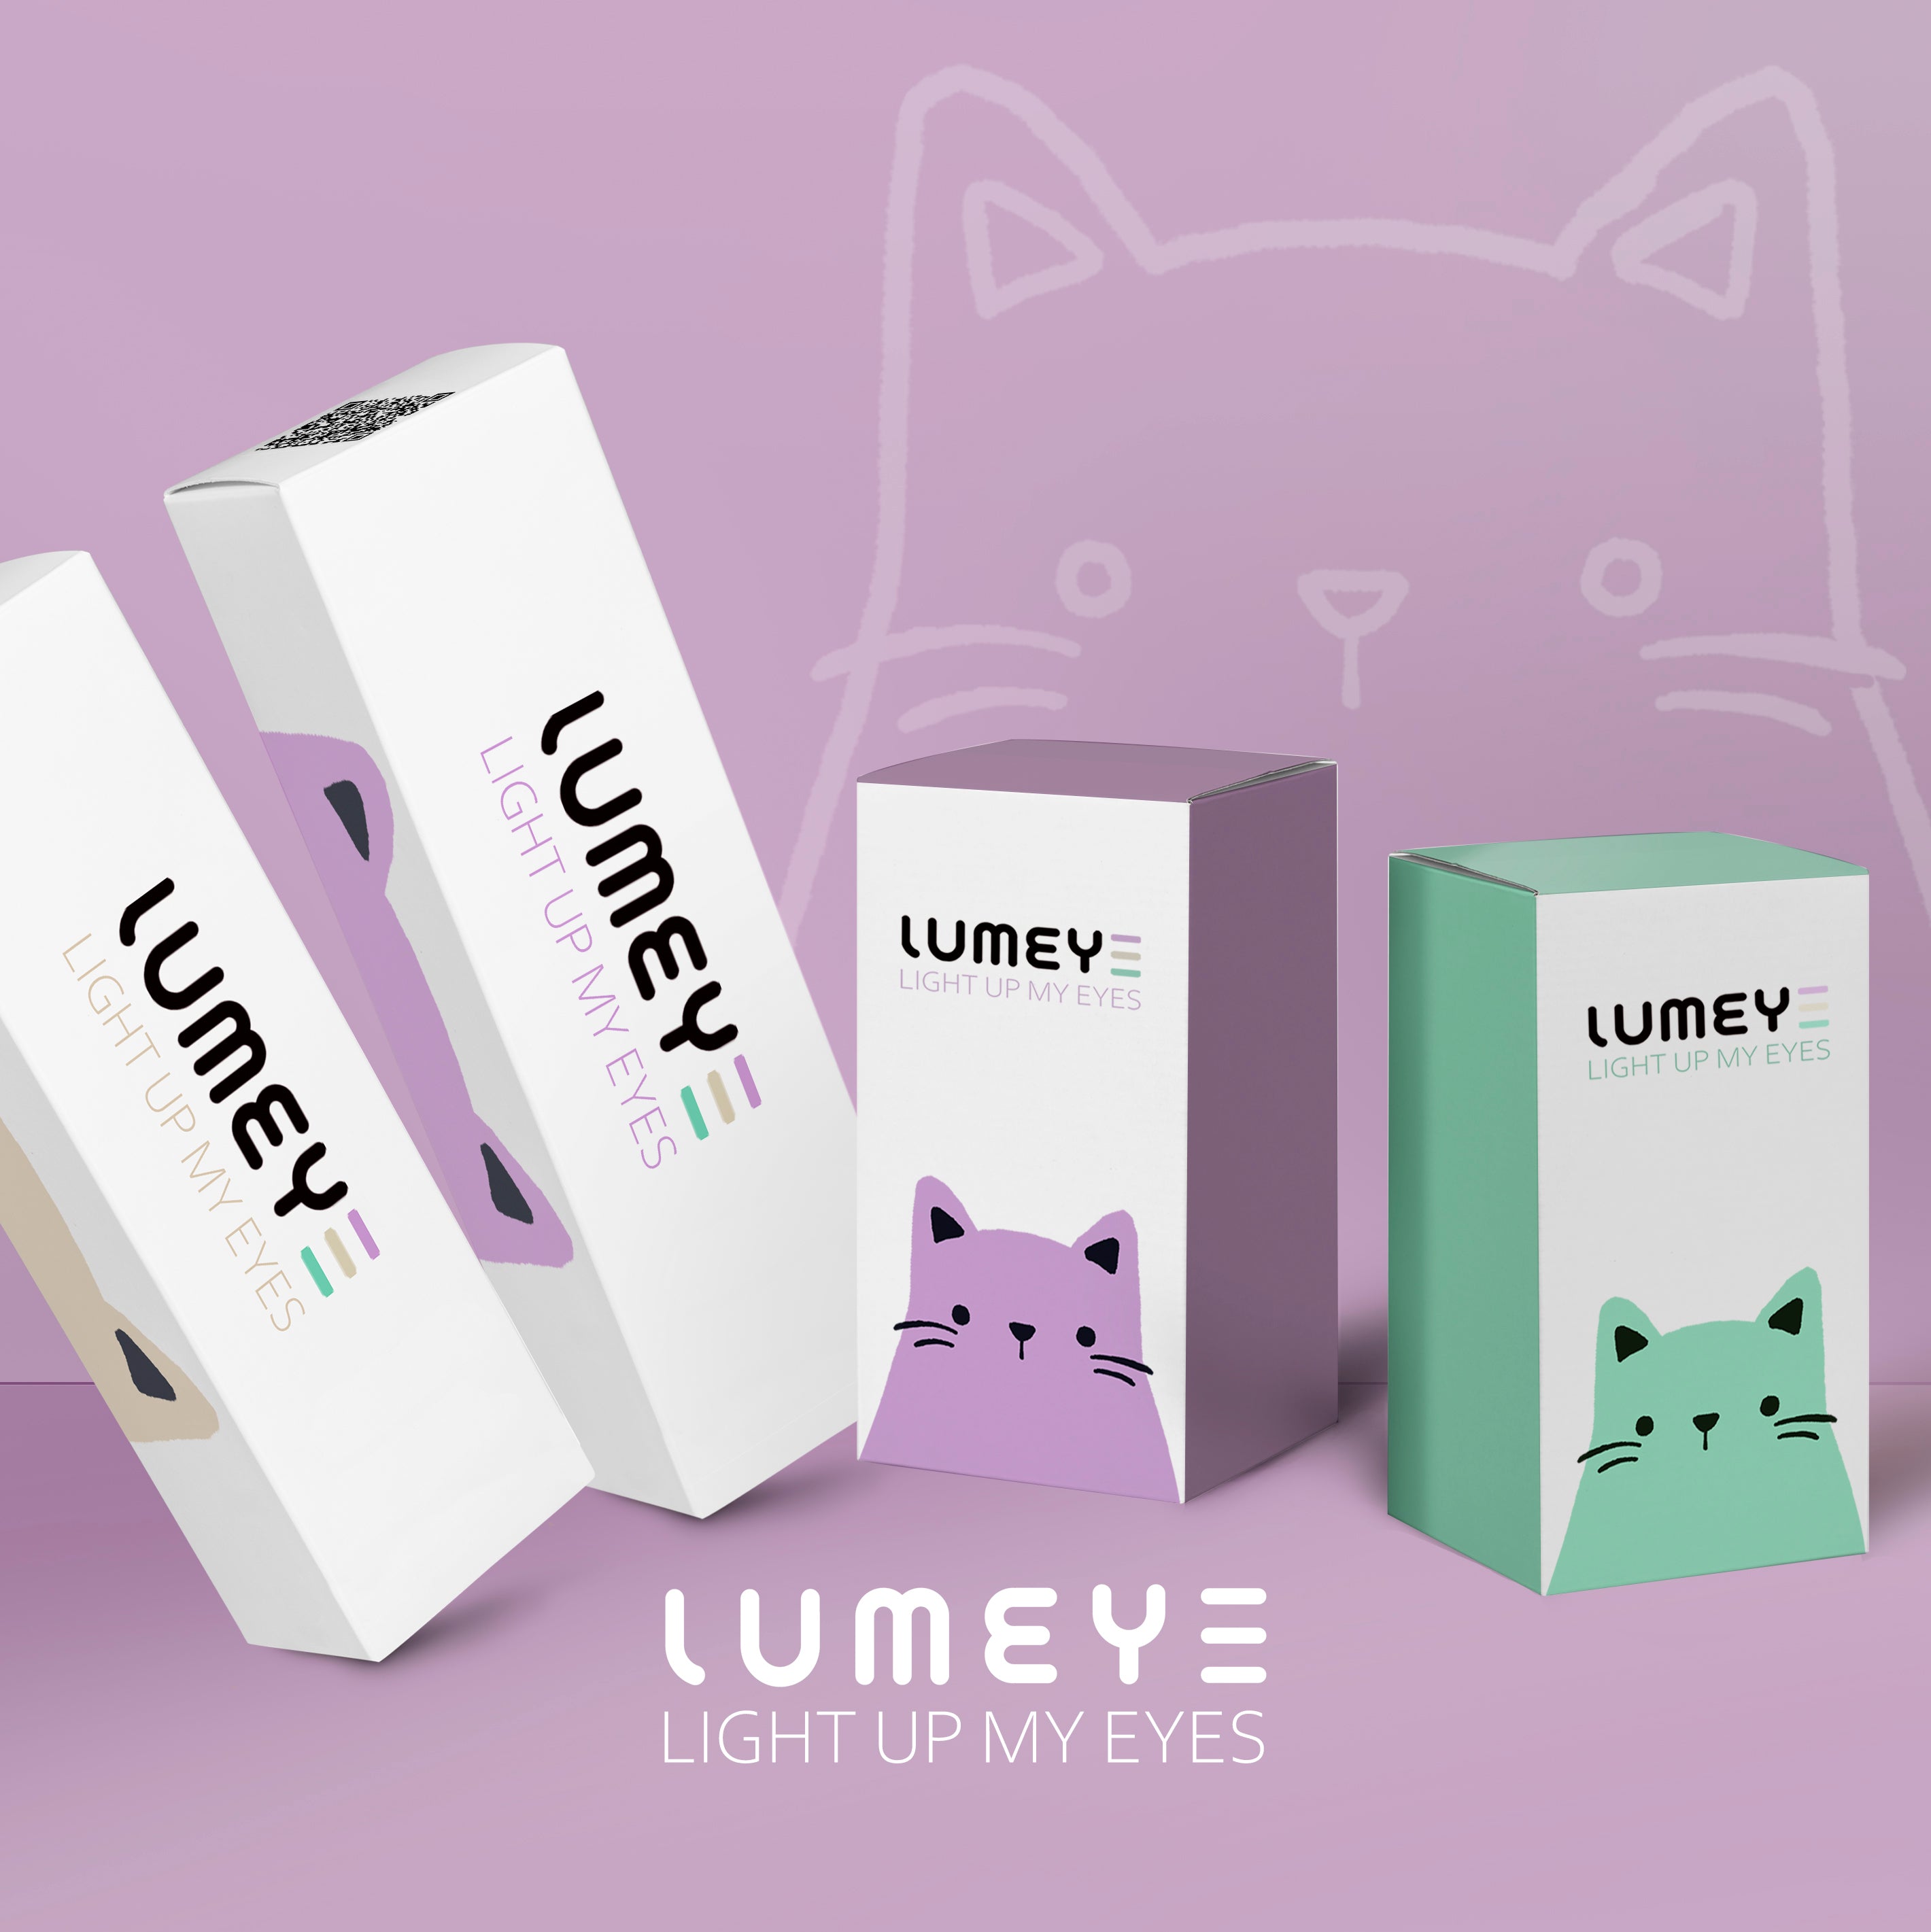 Best COLORED CONTACTS - LUMEYE Candy Mint Blue Colored Contact Lenses - LUMEYE